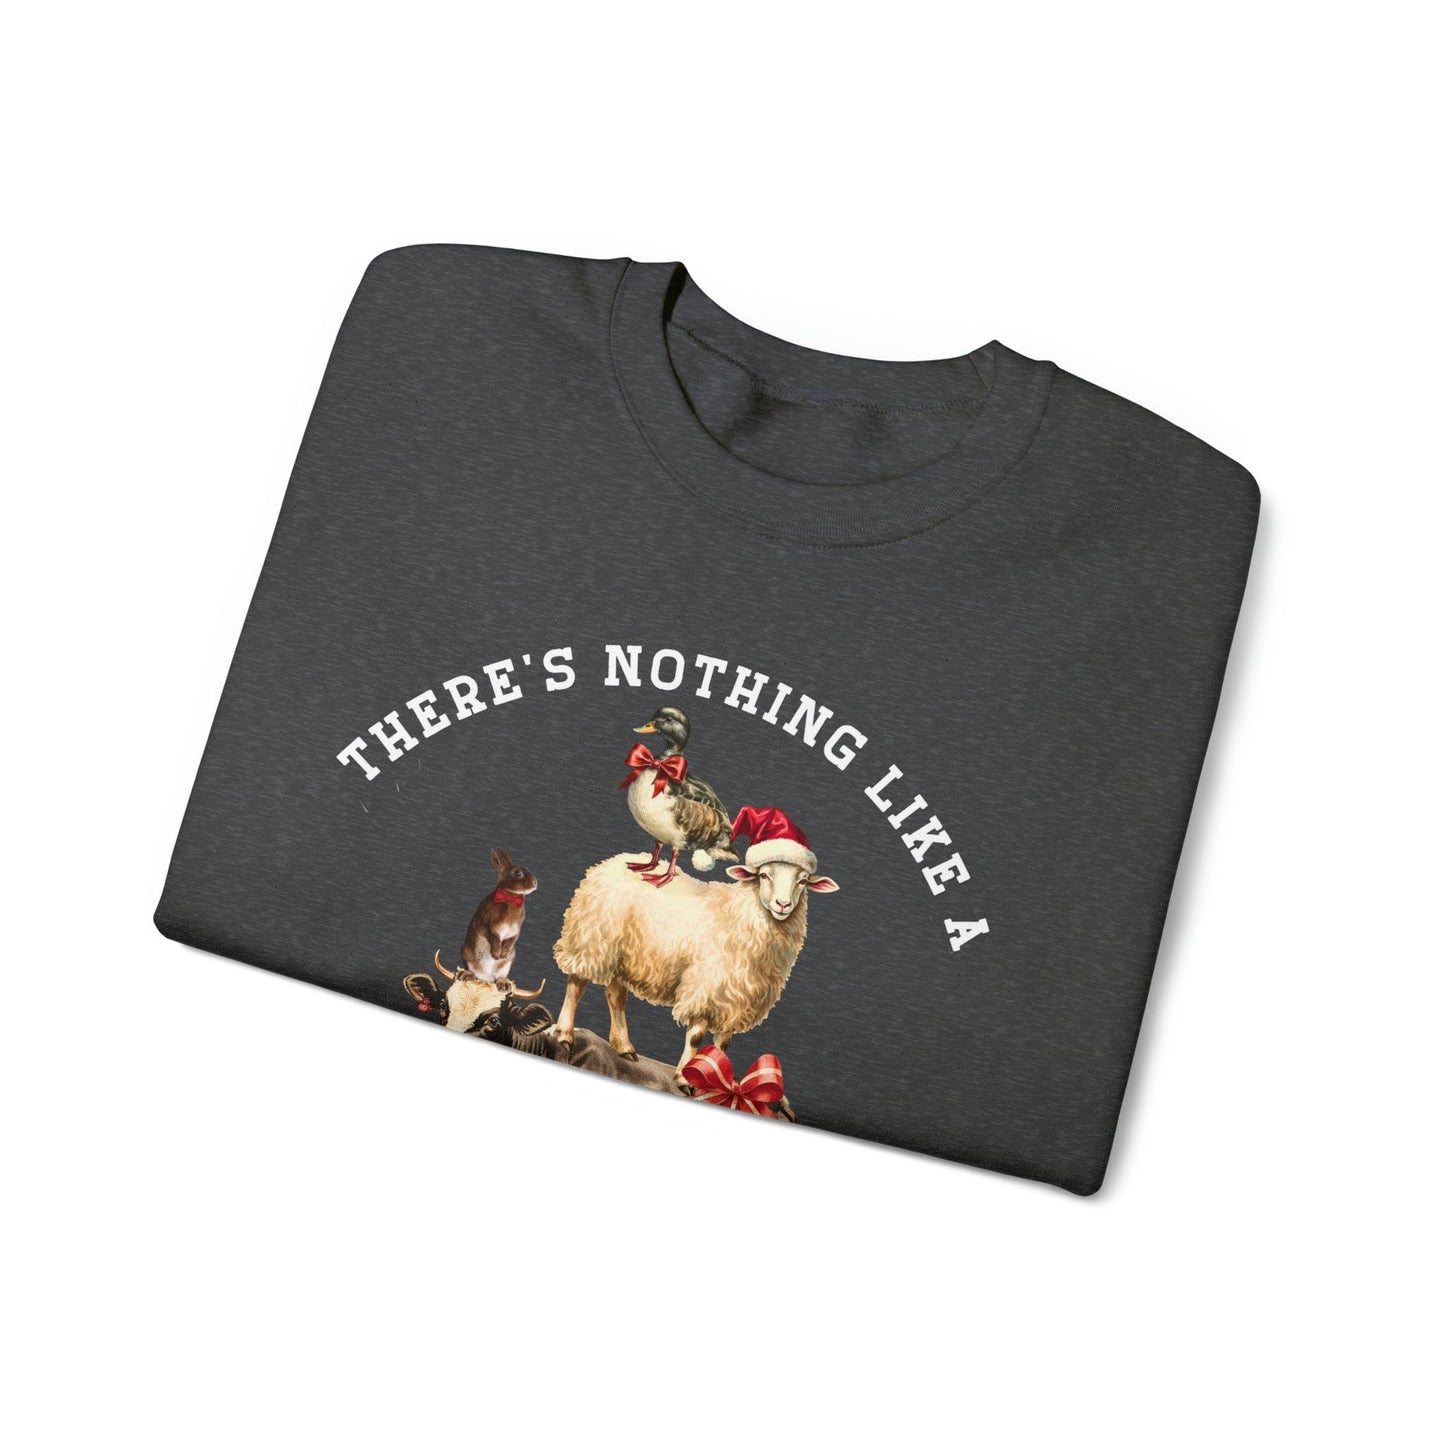 There's Nothing Like Christmas On The Farm Christmas Sweatshirt Farm Christmas Farm Sweatshirt Christmas Sweater Trendy Christmas Shirt Farmers - Giftsmojo